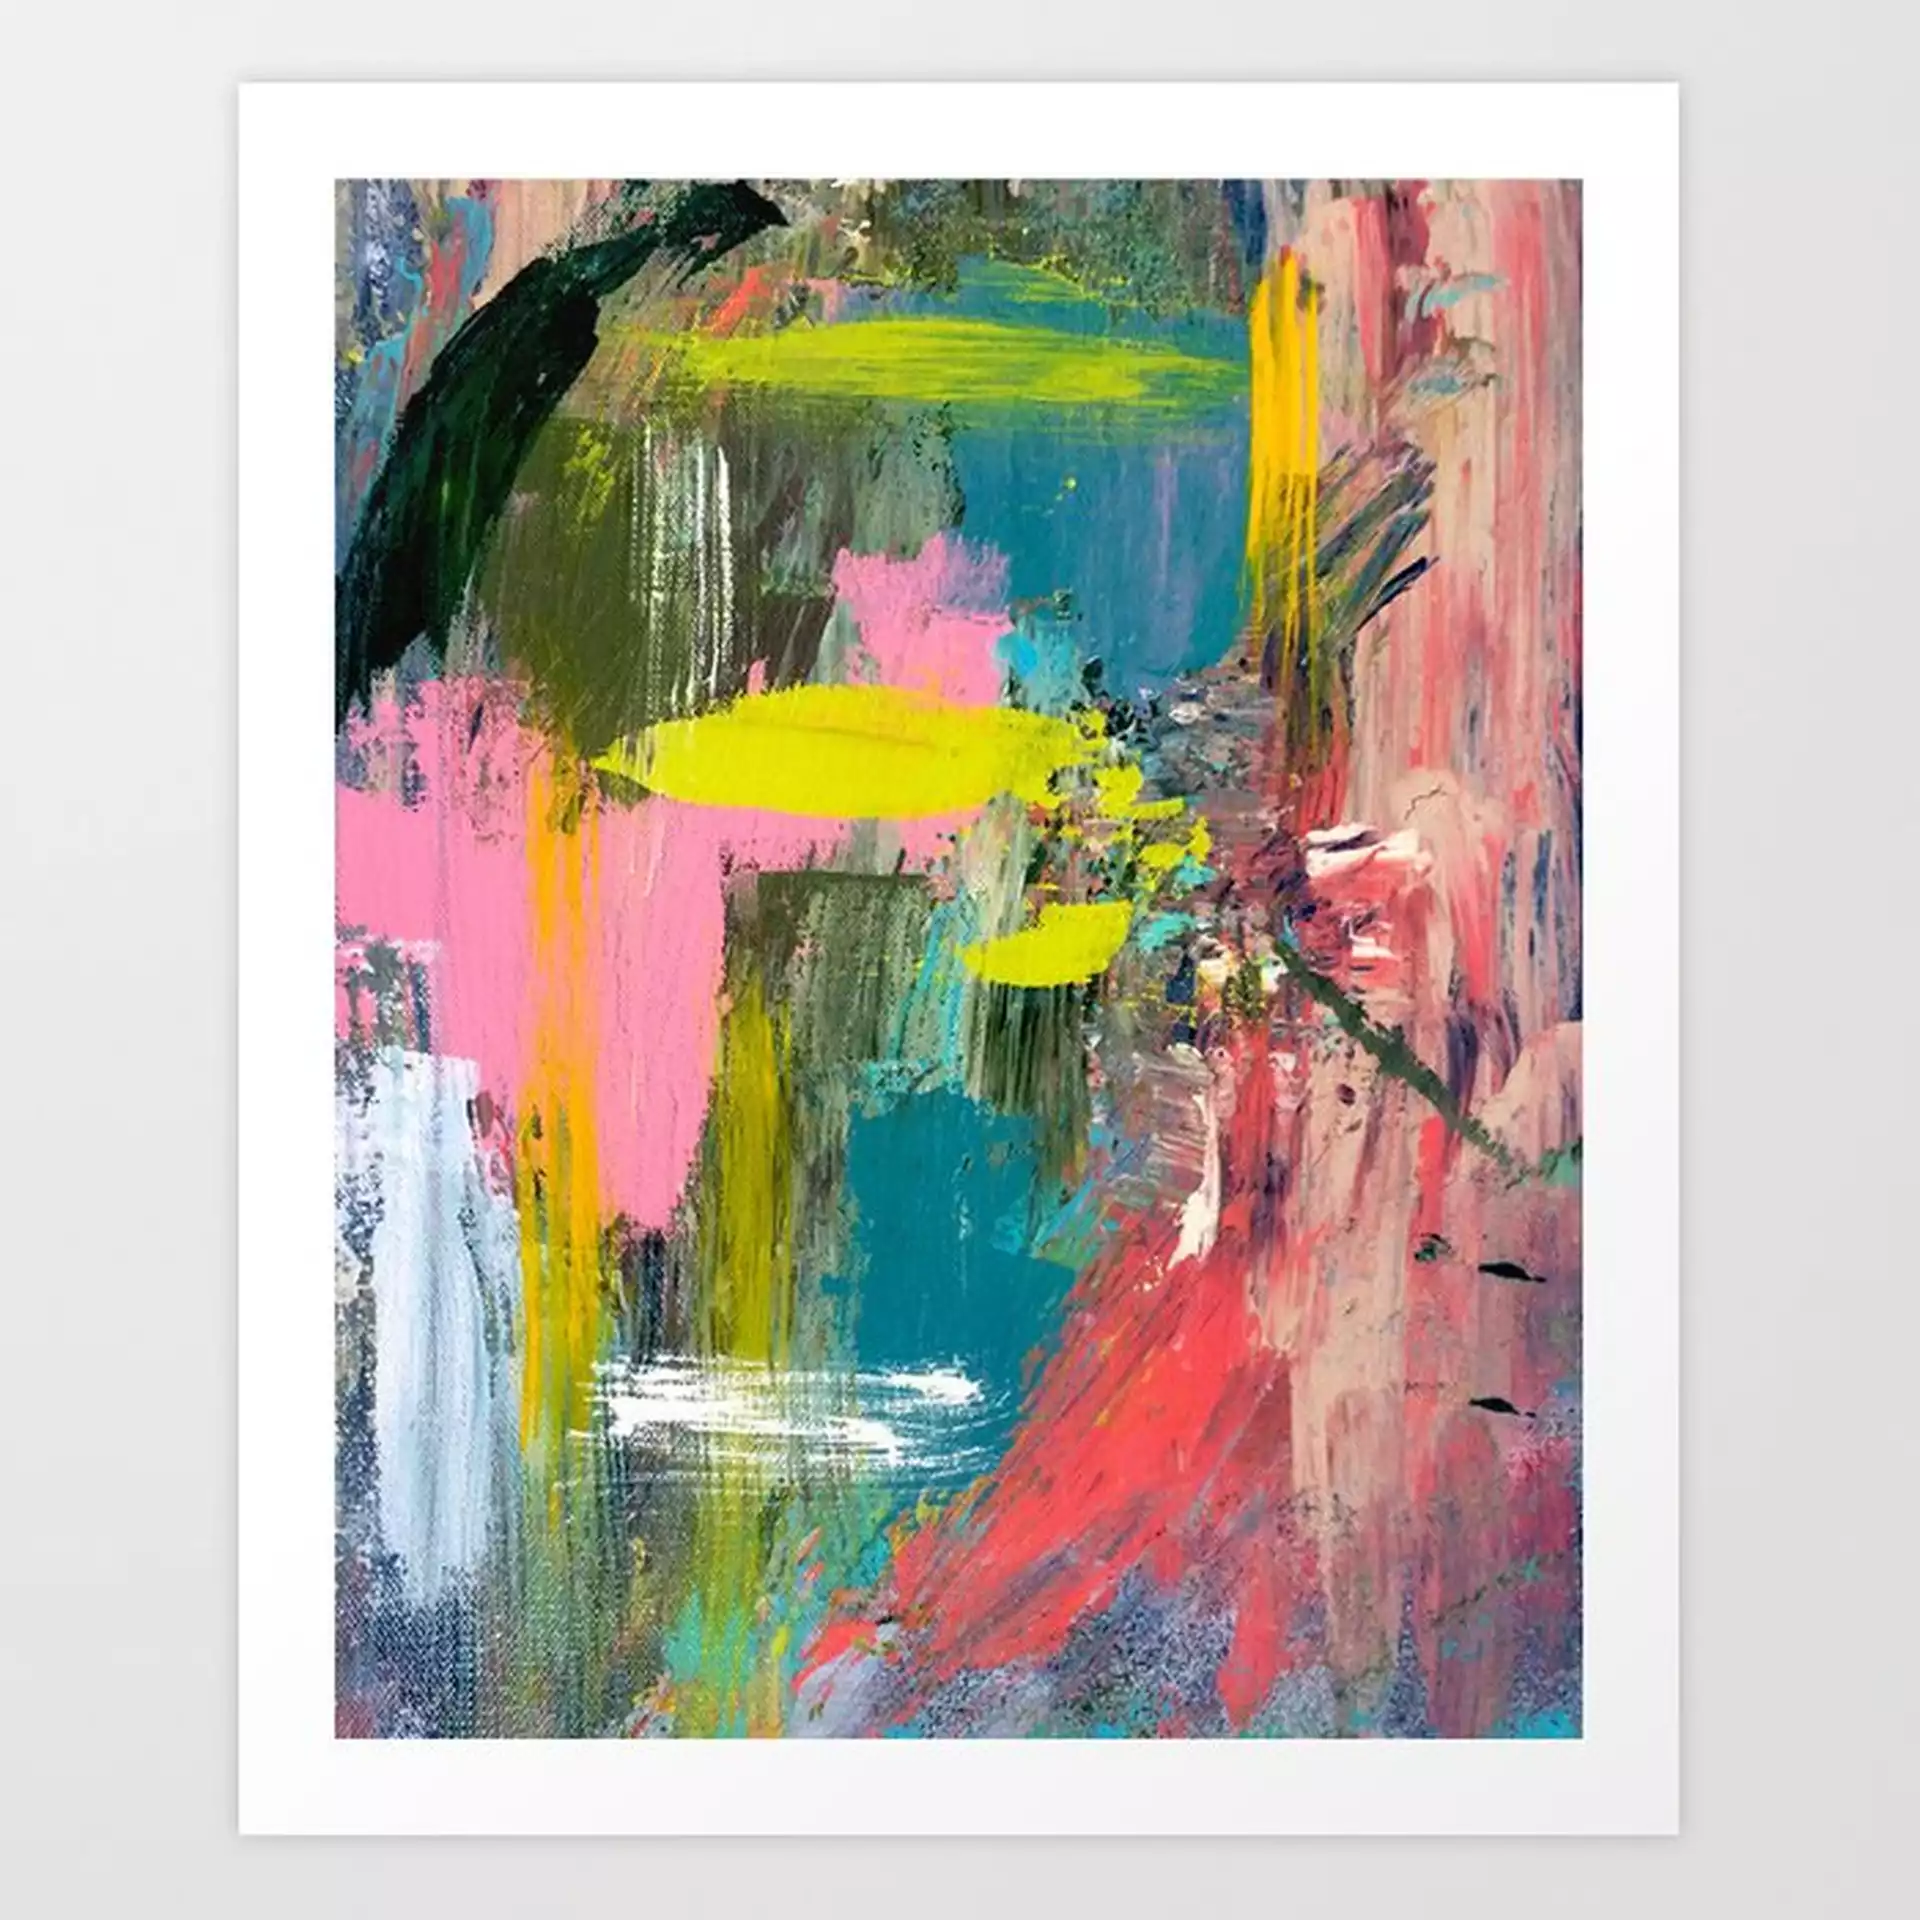 Collision - A Bright Abstract With Pinks, Greens, Blues, And Yellow Art Print by Alyssa Hamilton Art - X-Small